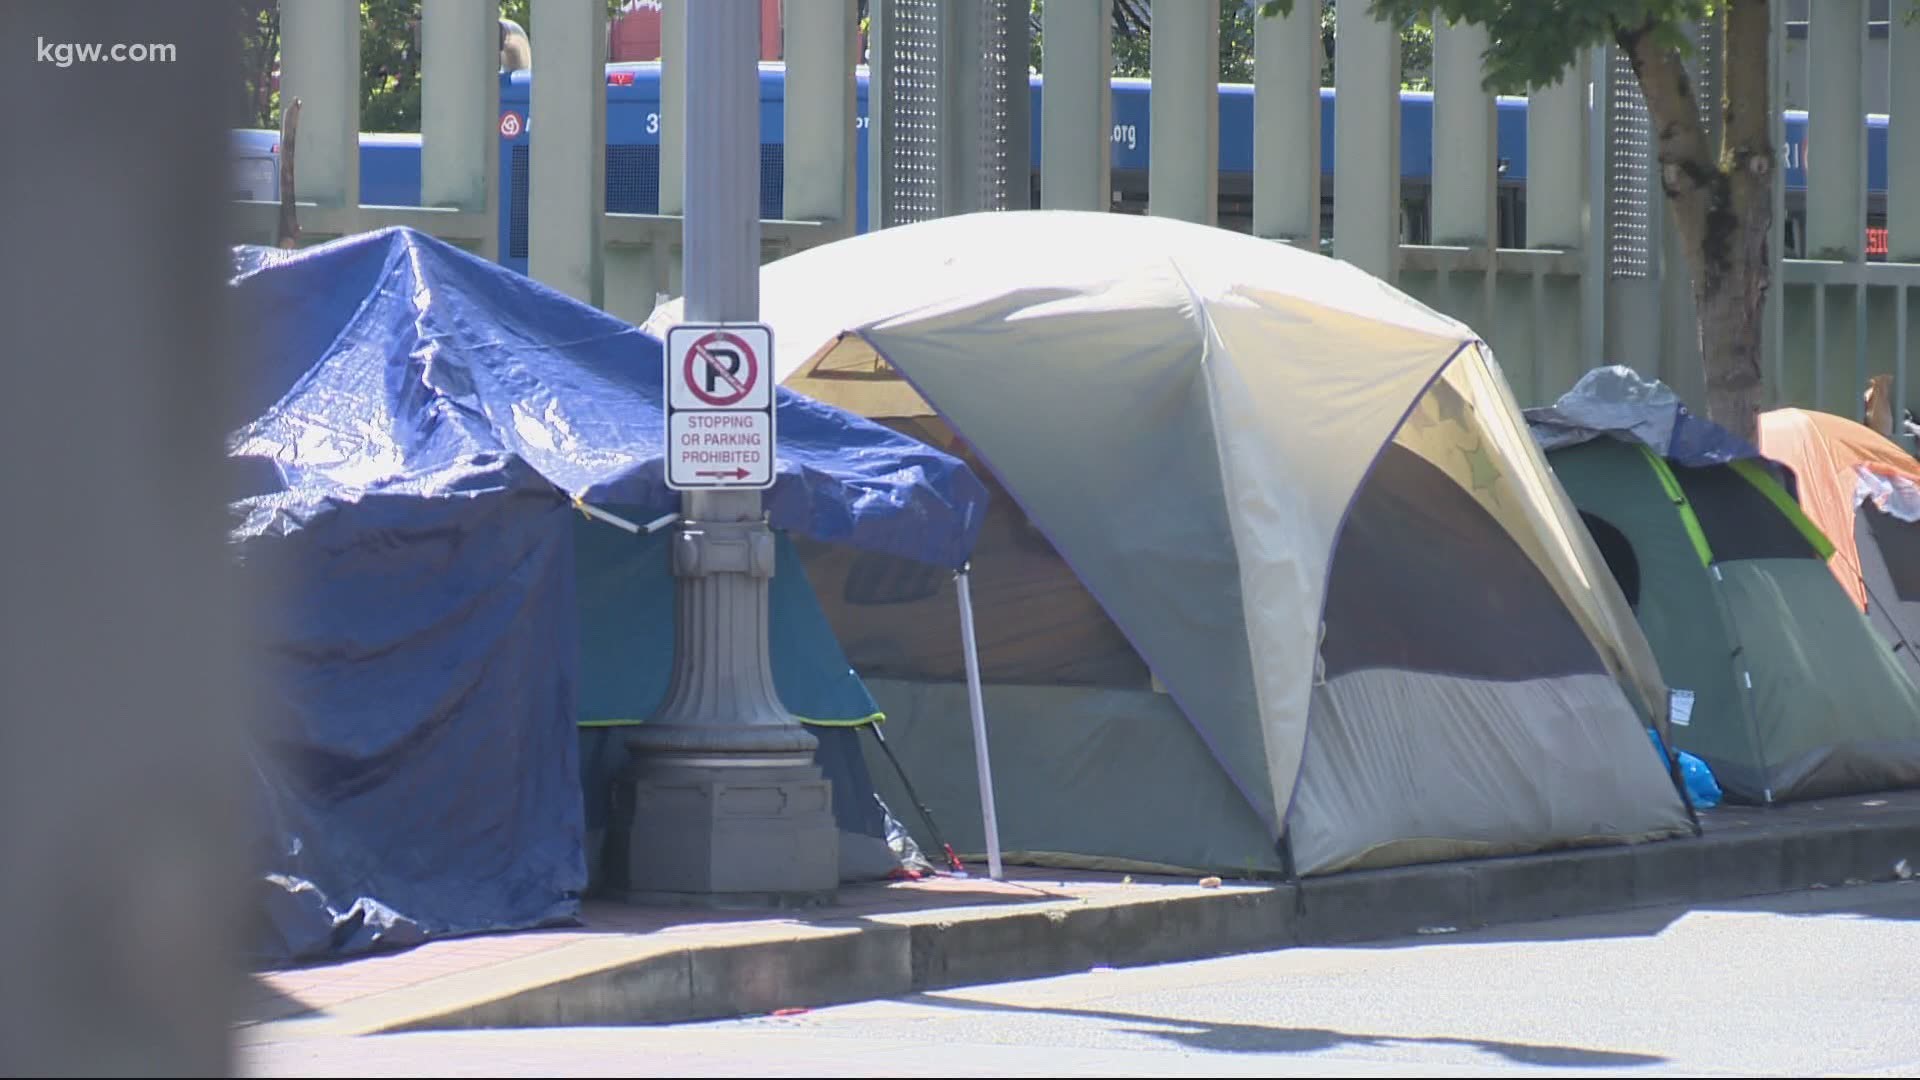 Has there been a coronavirus outbreak in Portland's homeless community? Are there still resources to help them? We answer some of your questions.